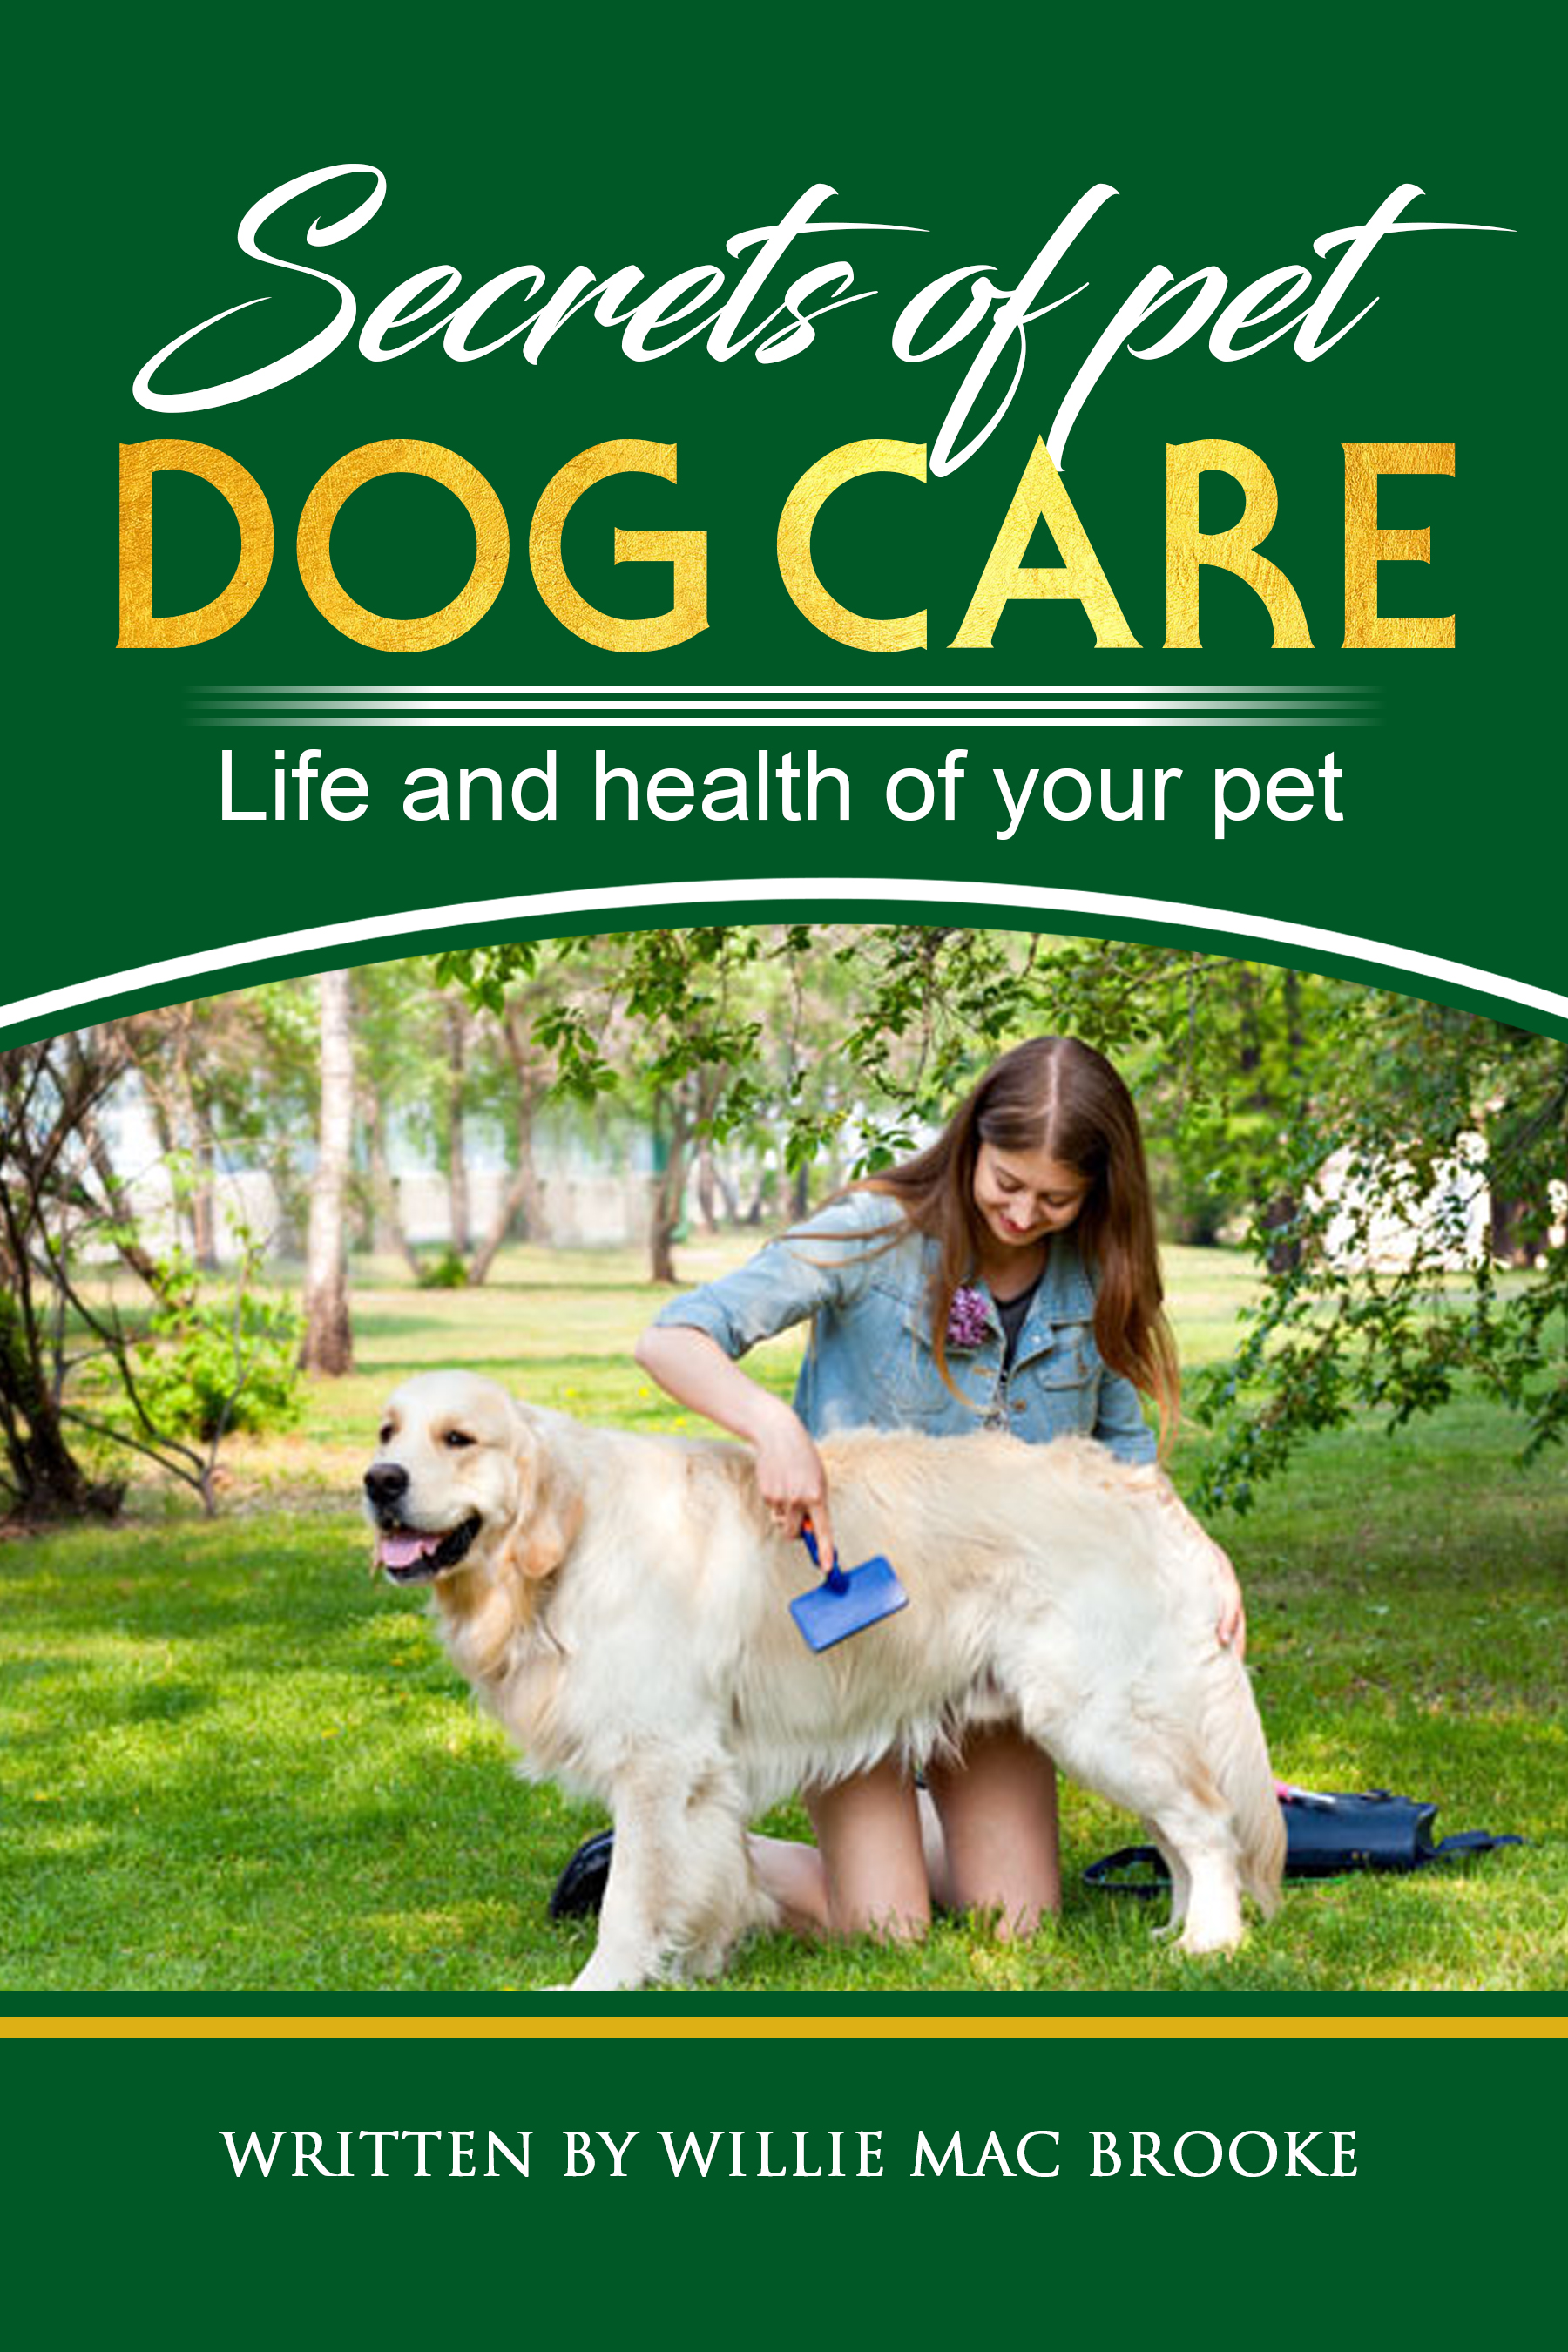 FREE: Secrets of Pets: Dog Care. A Guide to Ensure a Good Life and Health of Your Pet. (CHOOSING a Puppy, Caring for a Dog’s Coat, Feeding a Dog, Training a Dog, Socializing a Dog) by Willie Mac Brooke